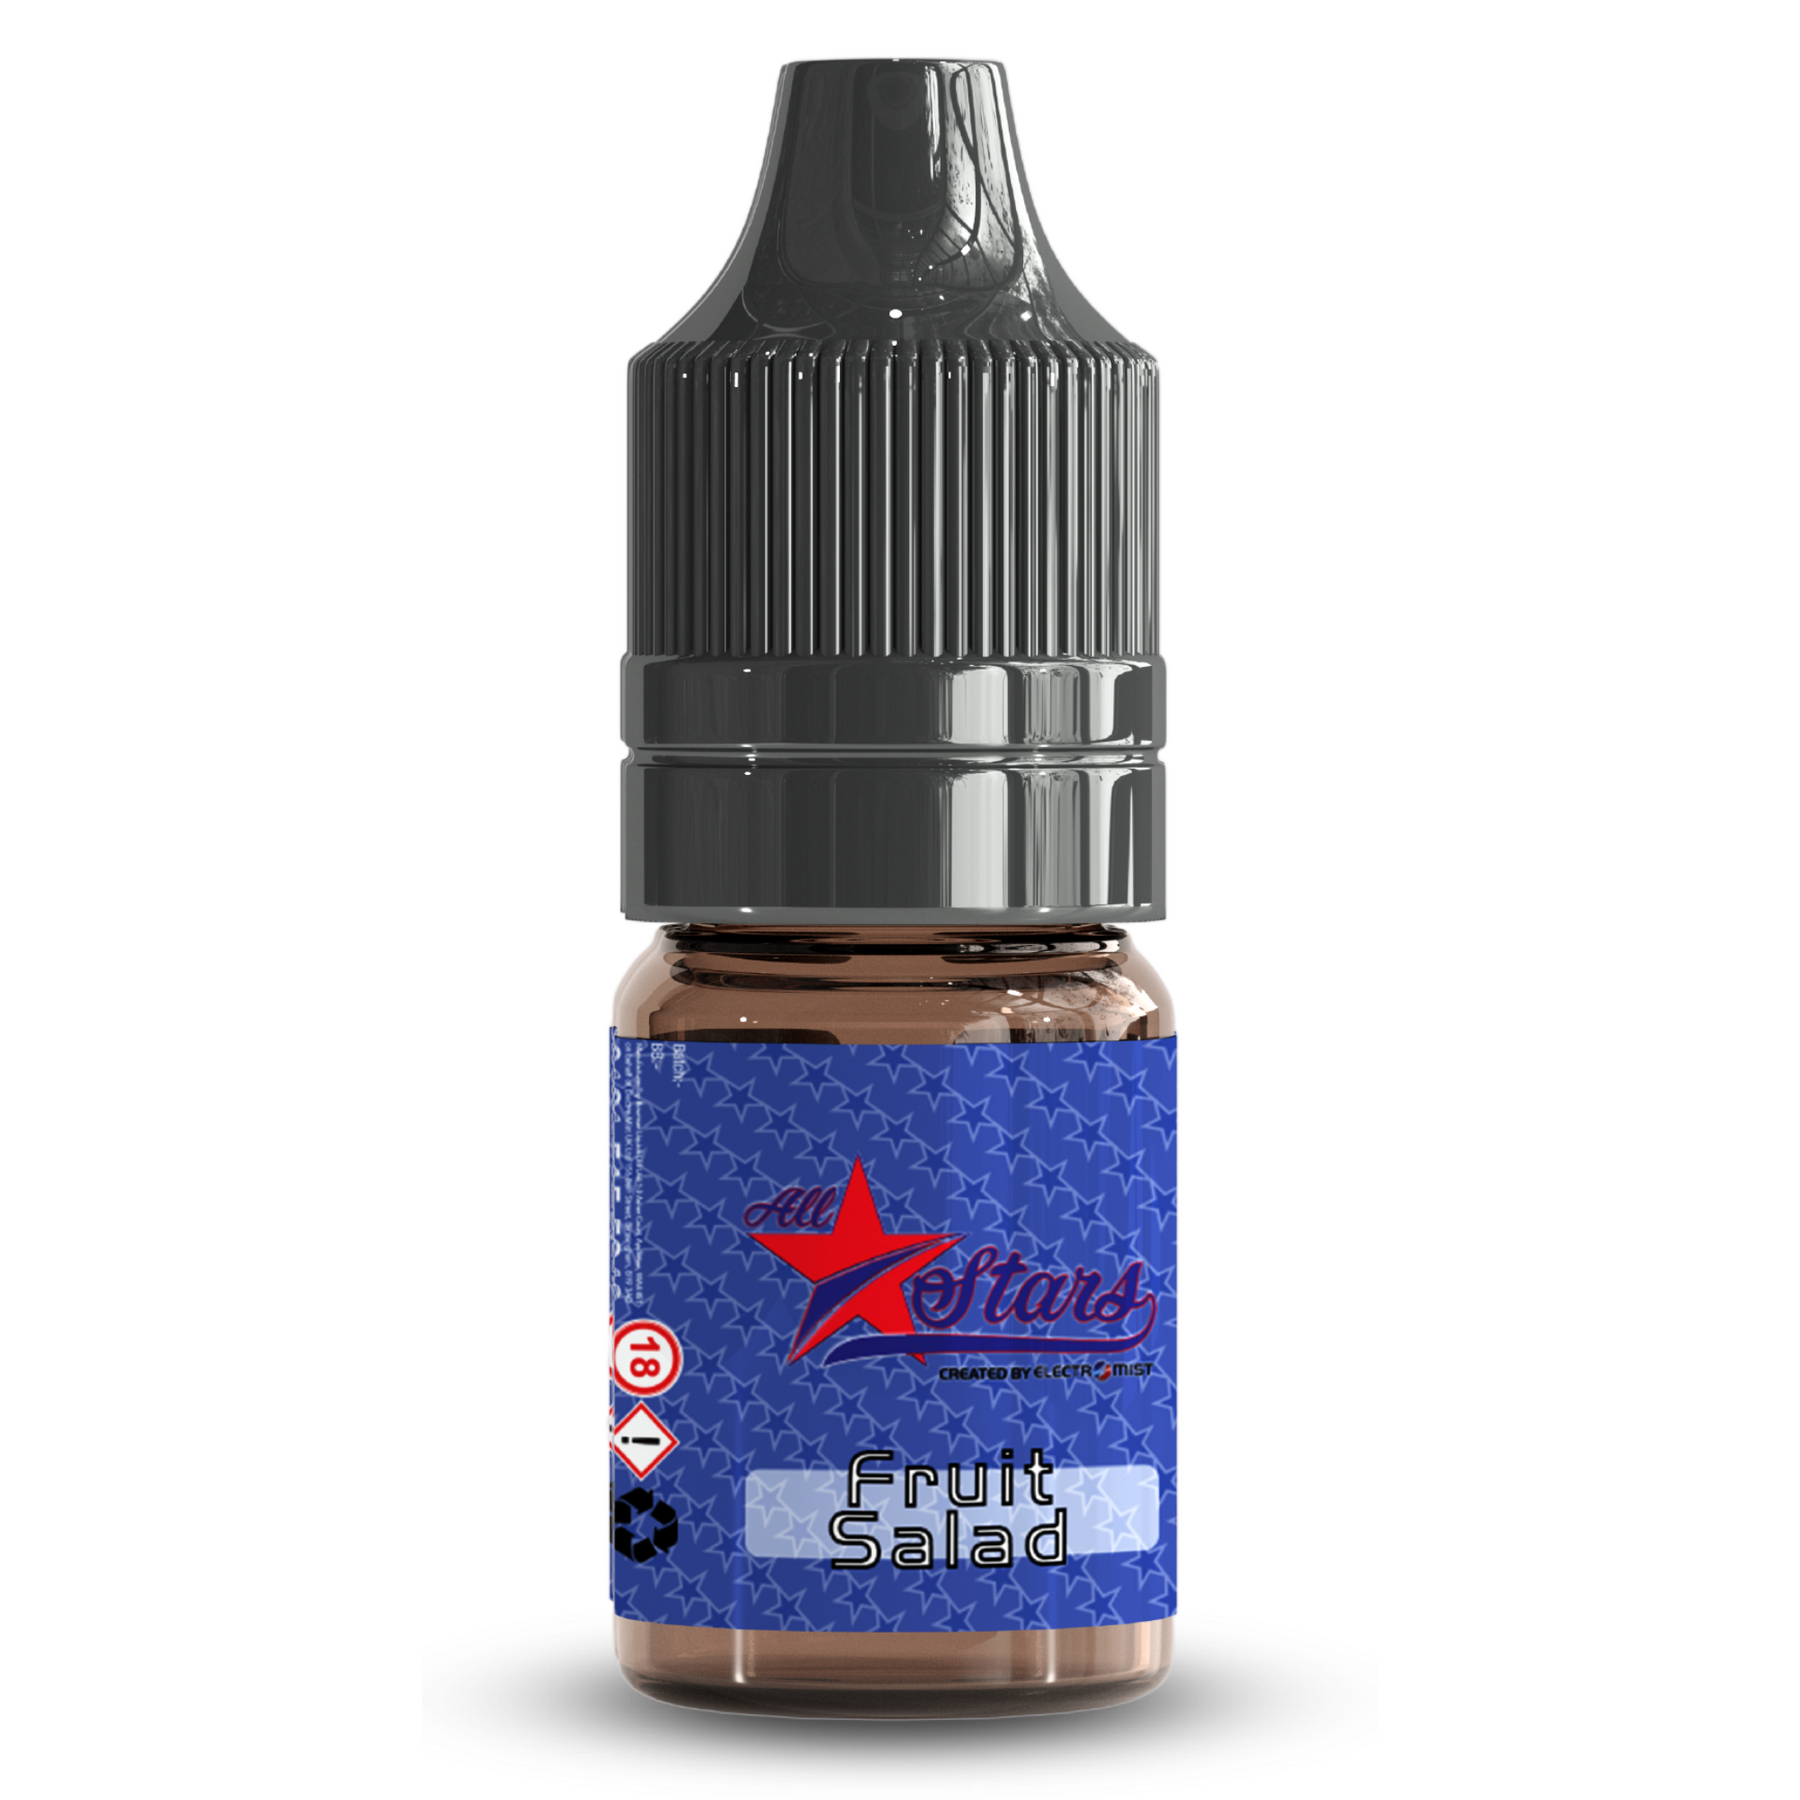 All Stars E-Liquid from the vape brand you can trust, Electromist, . Get your taste buds ready for a flavour sensation, Fruit Salad. Nicotine Content: 6mg/12mg/18mg Products may contain nicotine. For over 18s Only ejuice, vape pen, eliquid, e cigarette, 10ml, vaping, cloud, PG, VG, 60/40, vape liquid, Flavour, TPD